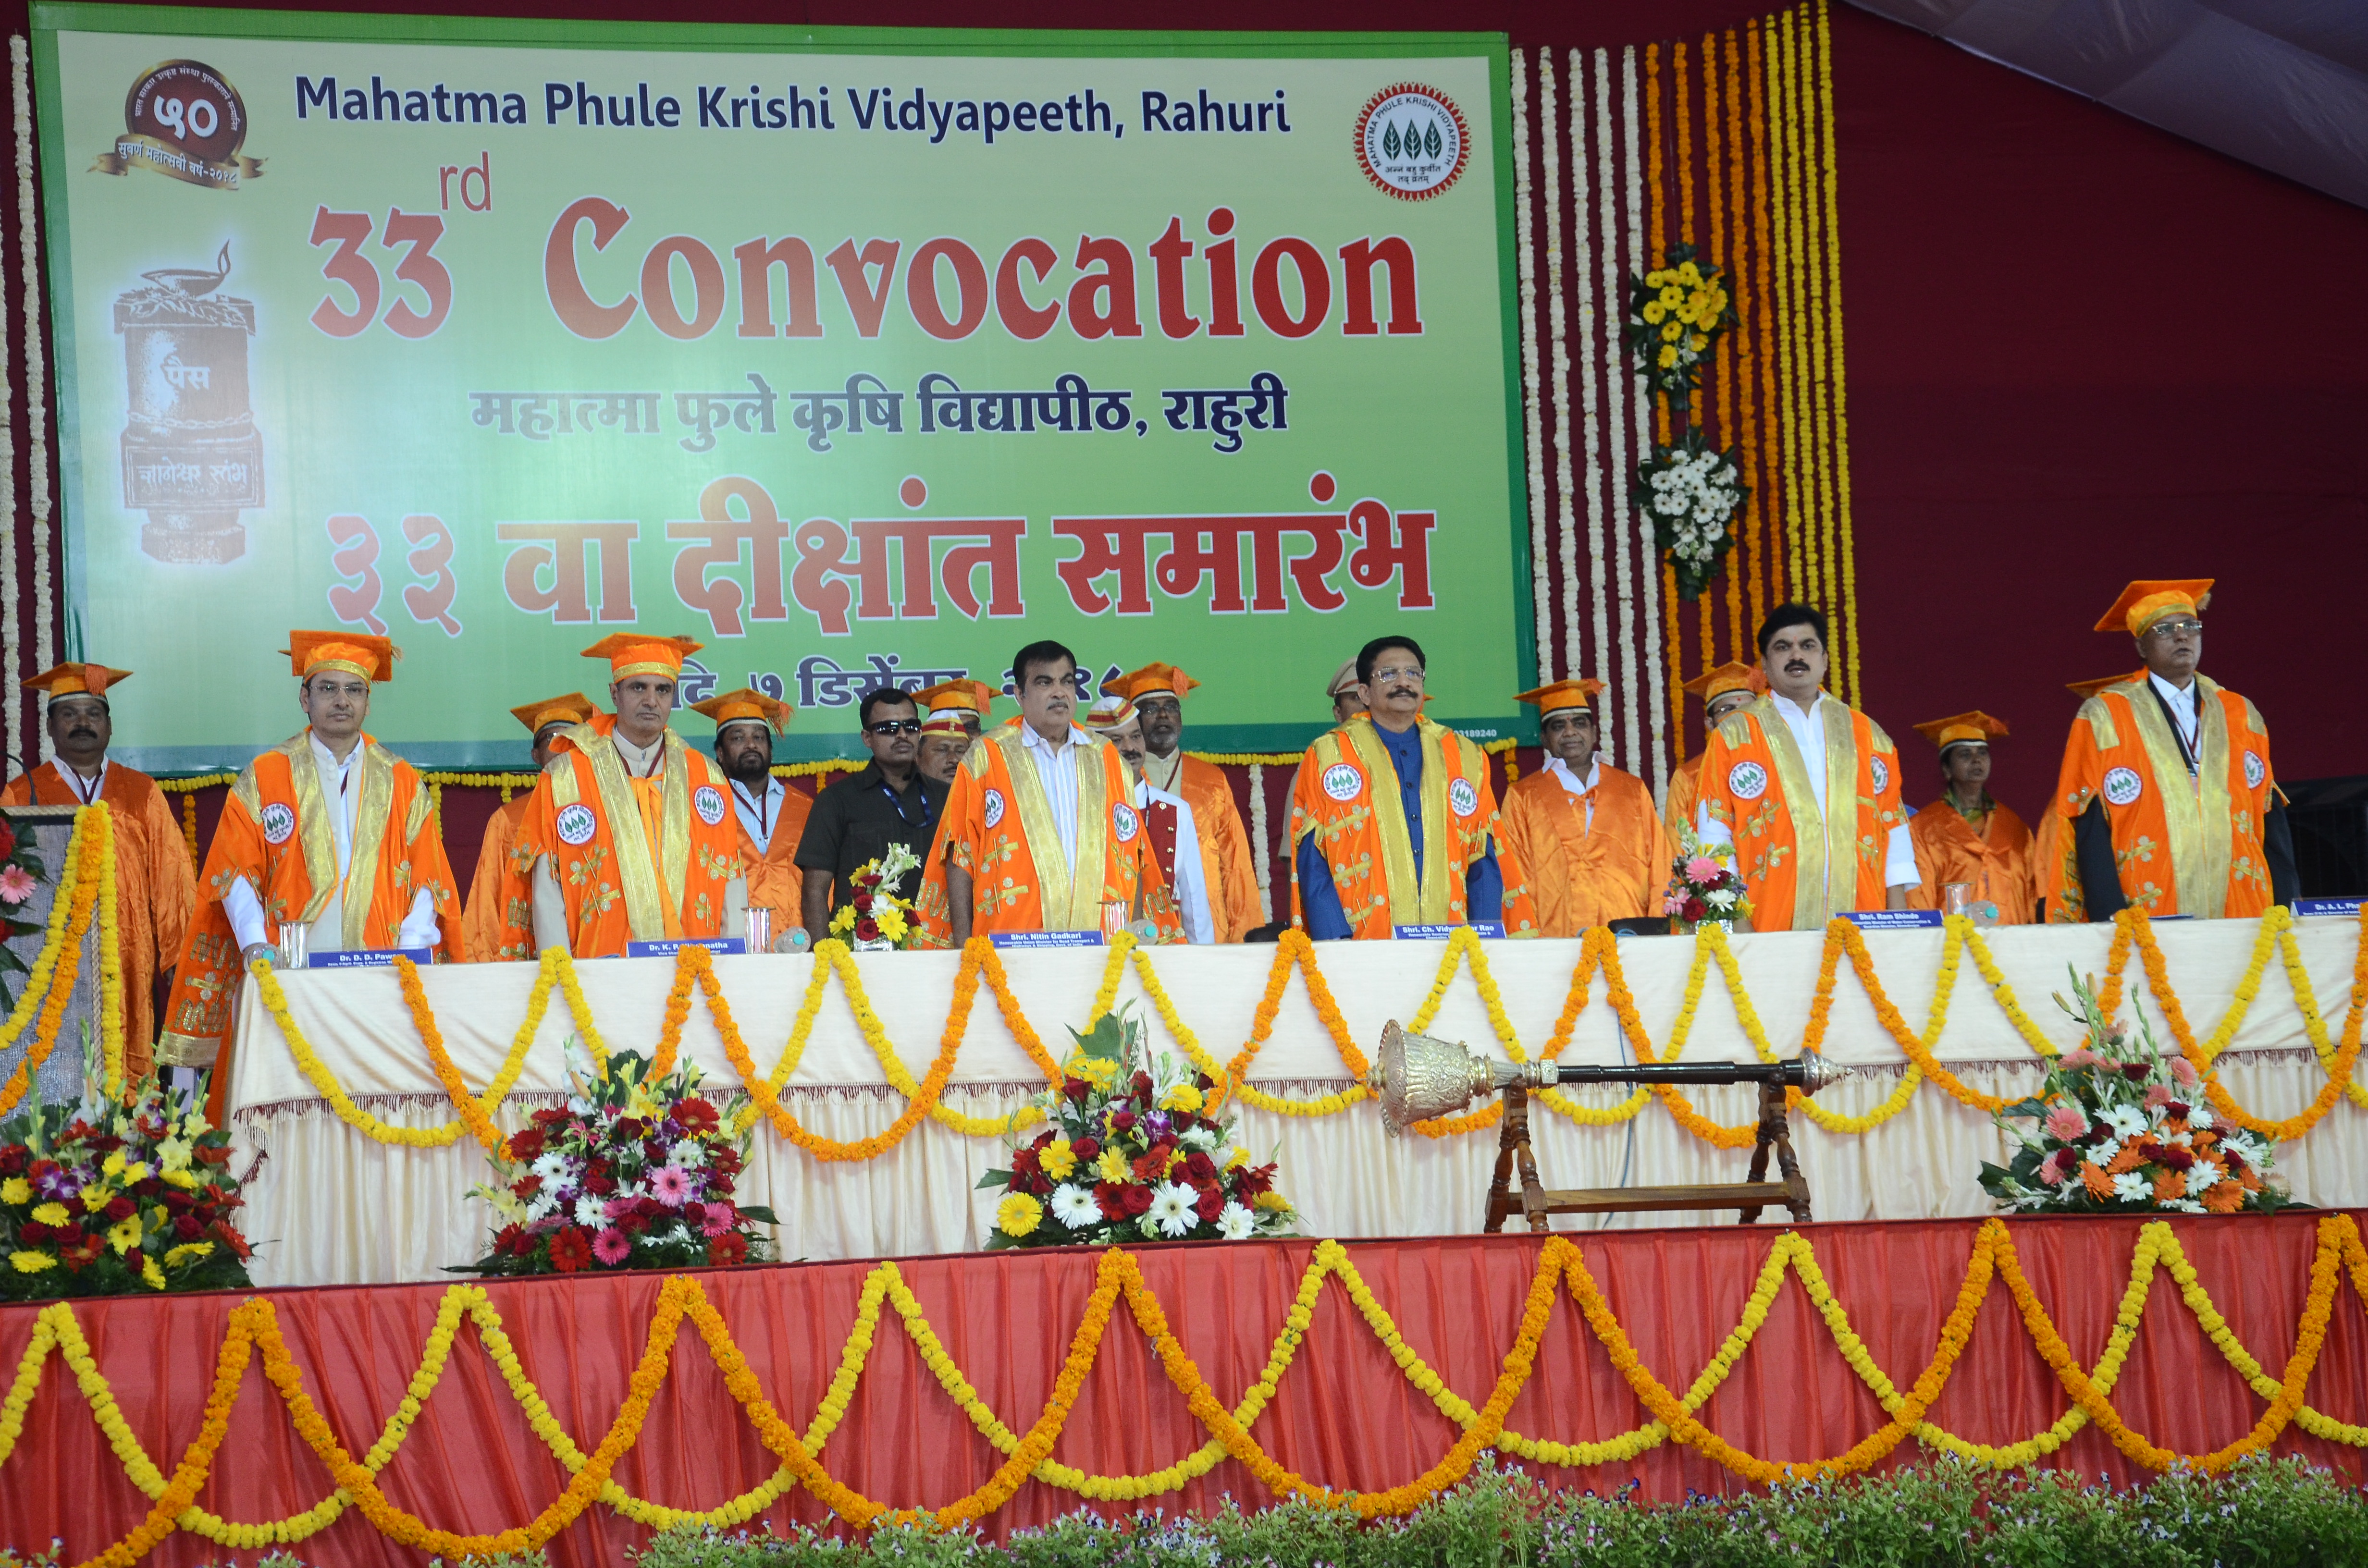 33rd Convocation